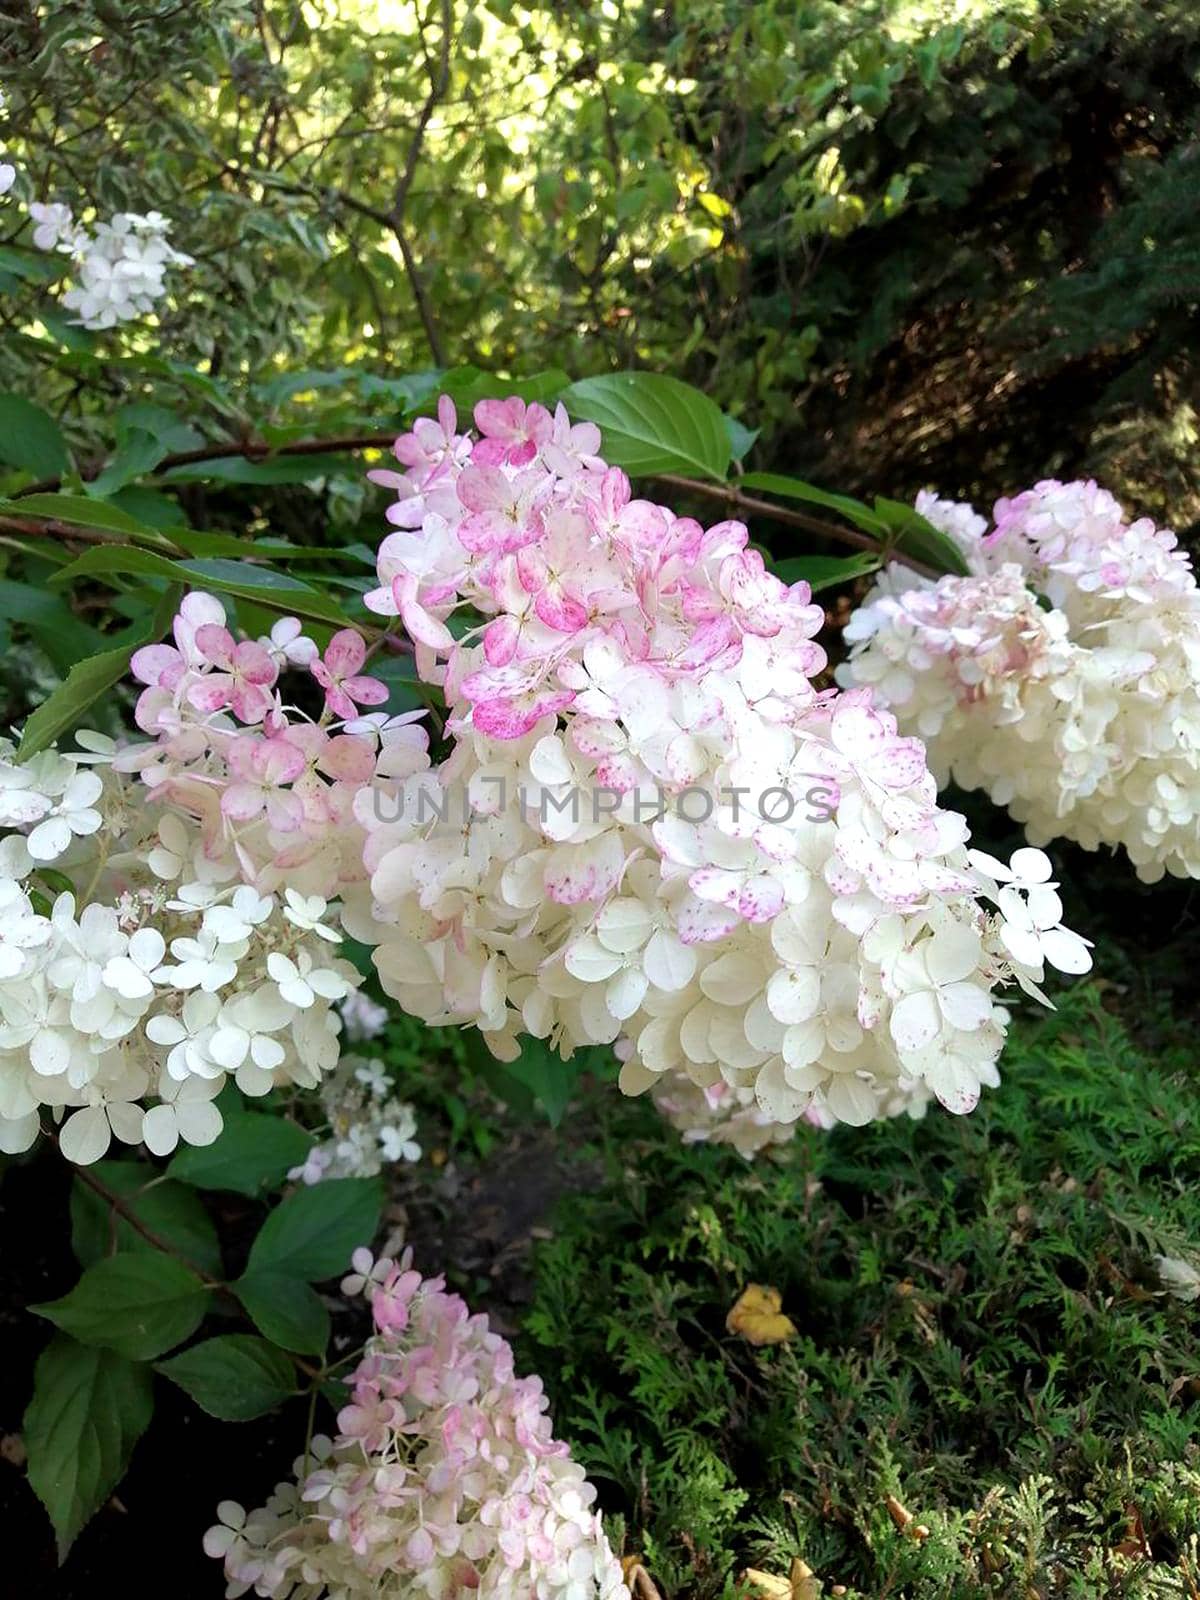 Species of flowering plant in the family Hydrangeaceae